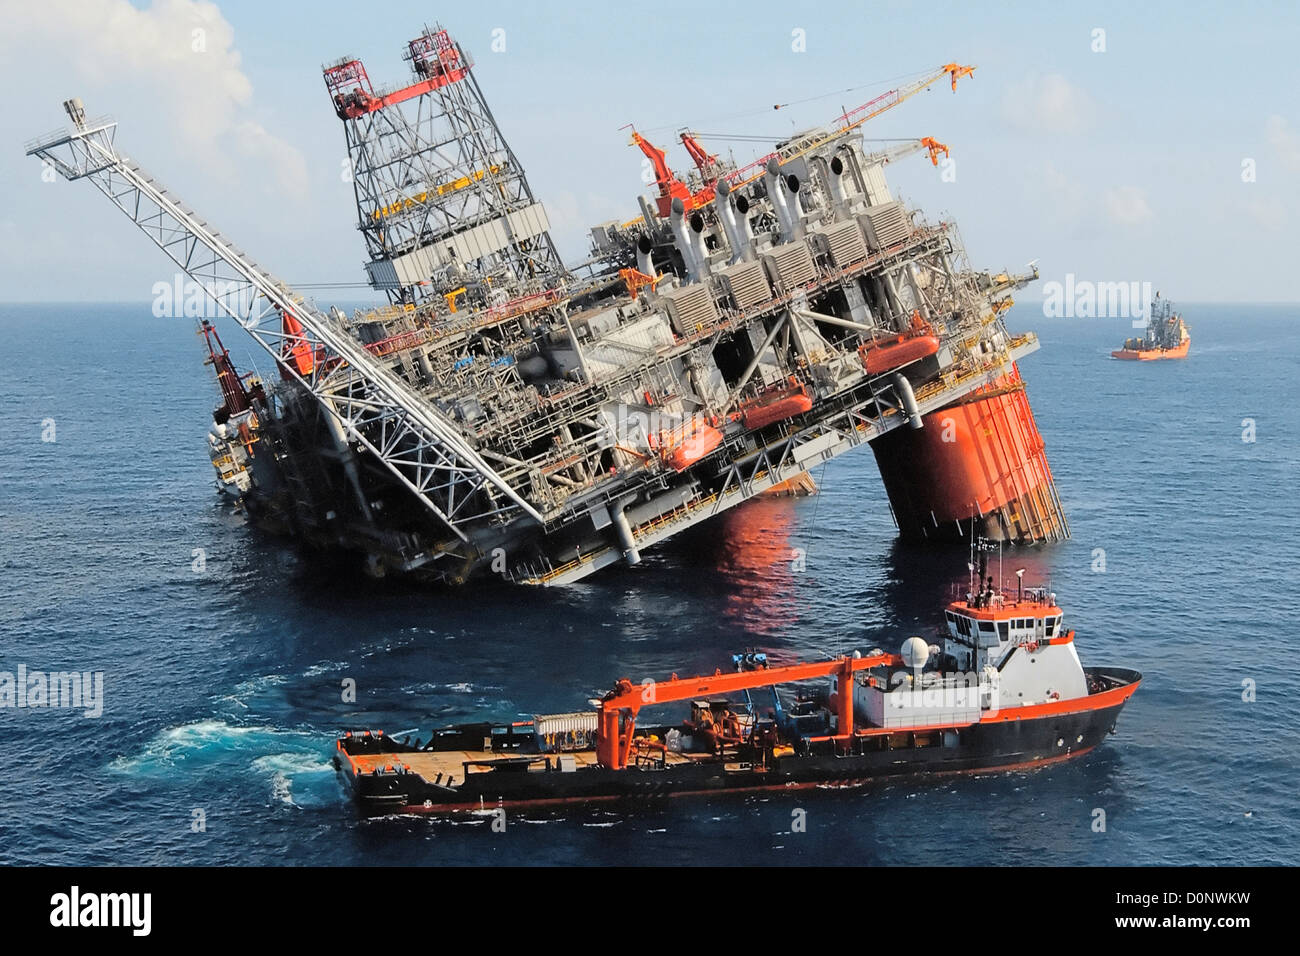 Oil Rig Damaged by Hurricane Dennis Stock Photo